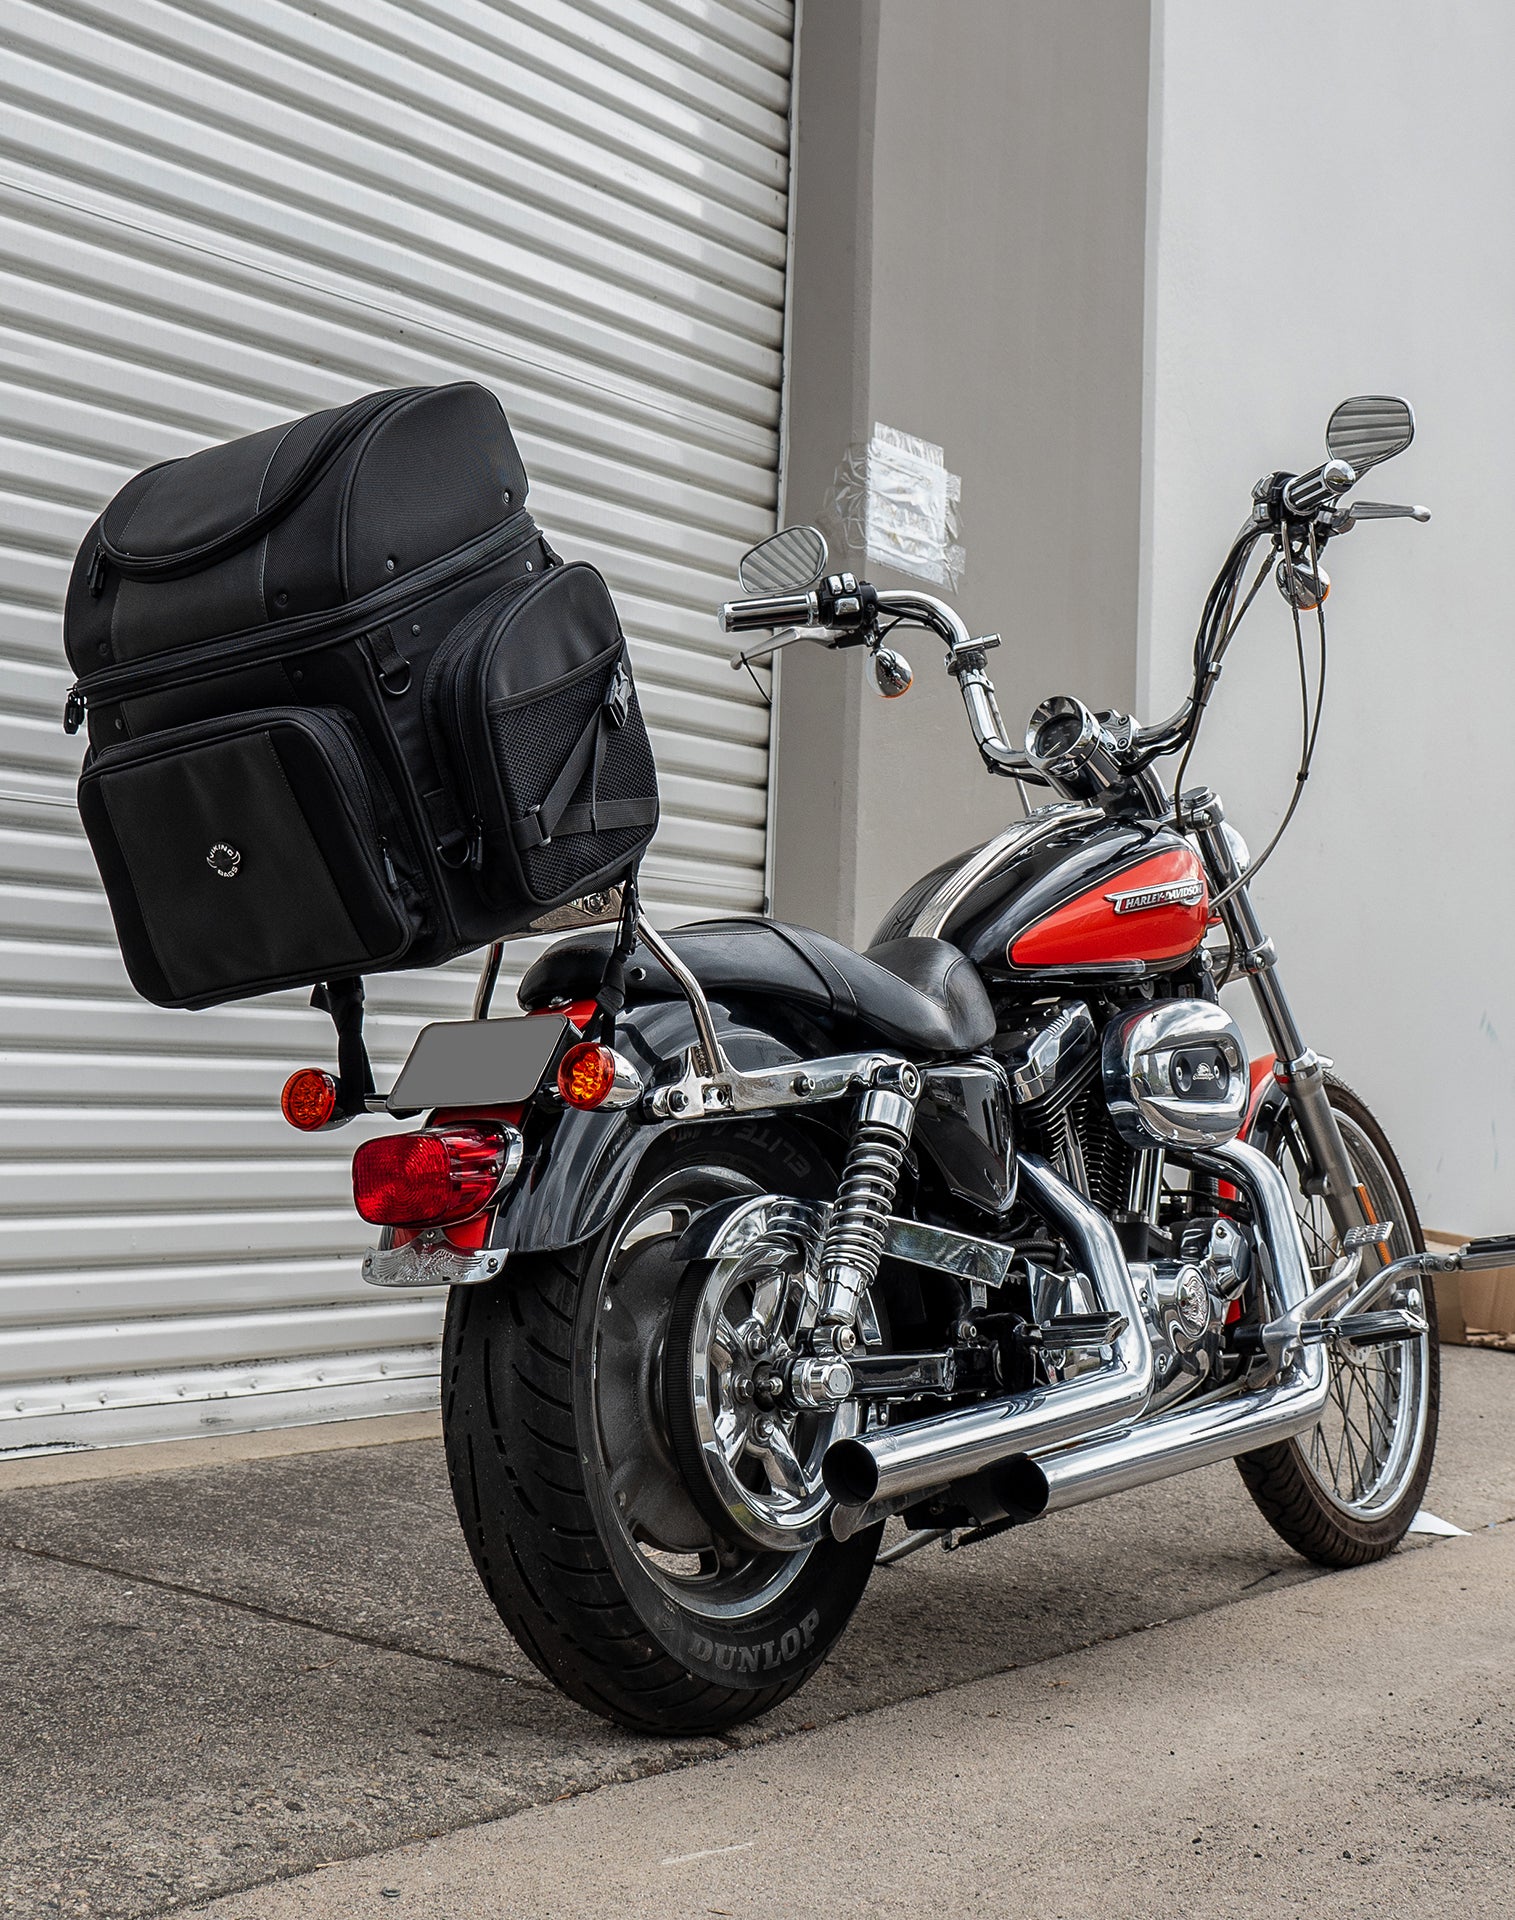 52L - Galleon XL Hysoung Motorcycle Tail Bag